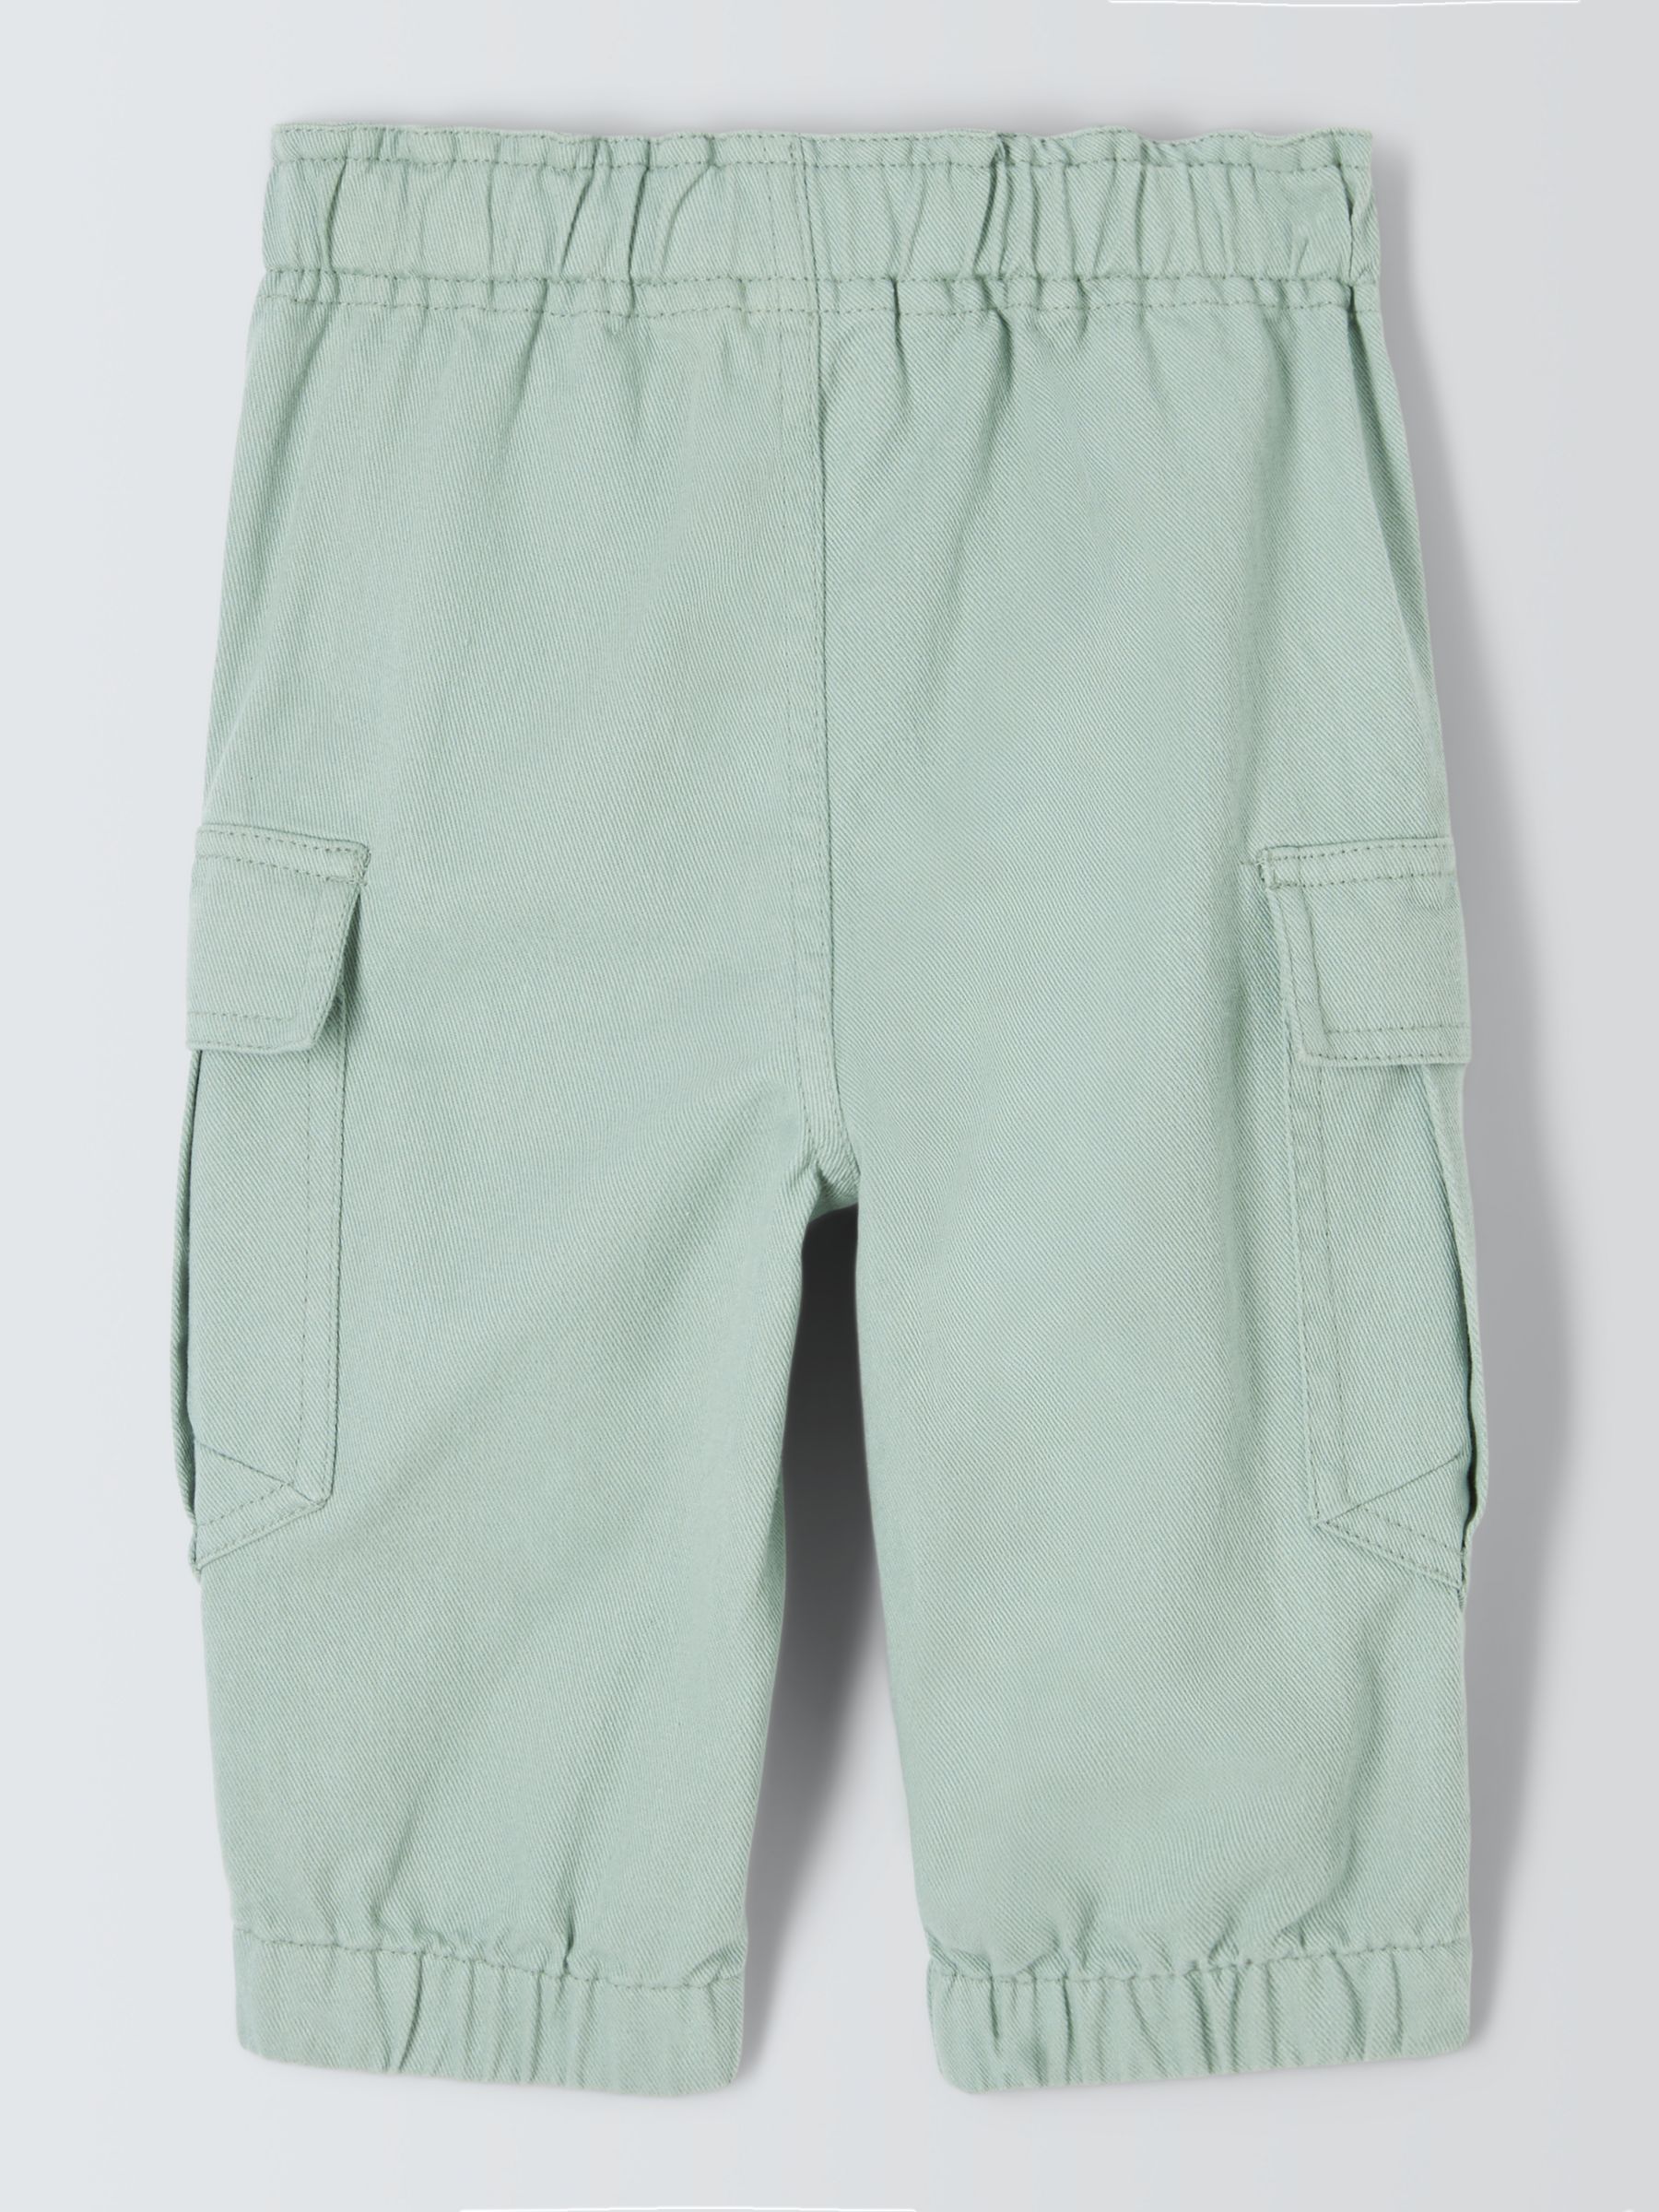 John Lewis Baby Twill Cargo Trousers, Green, 0-3 months